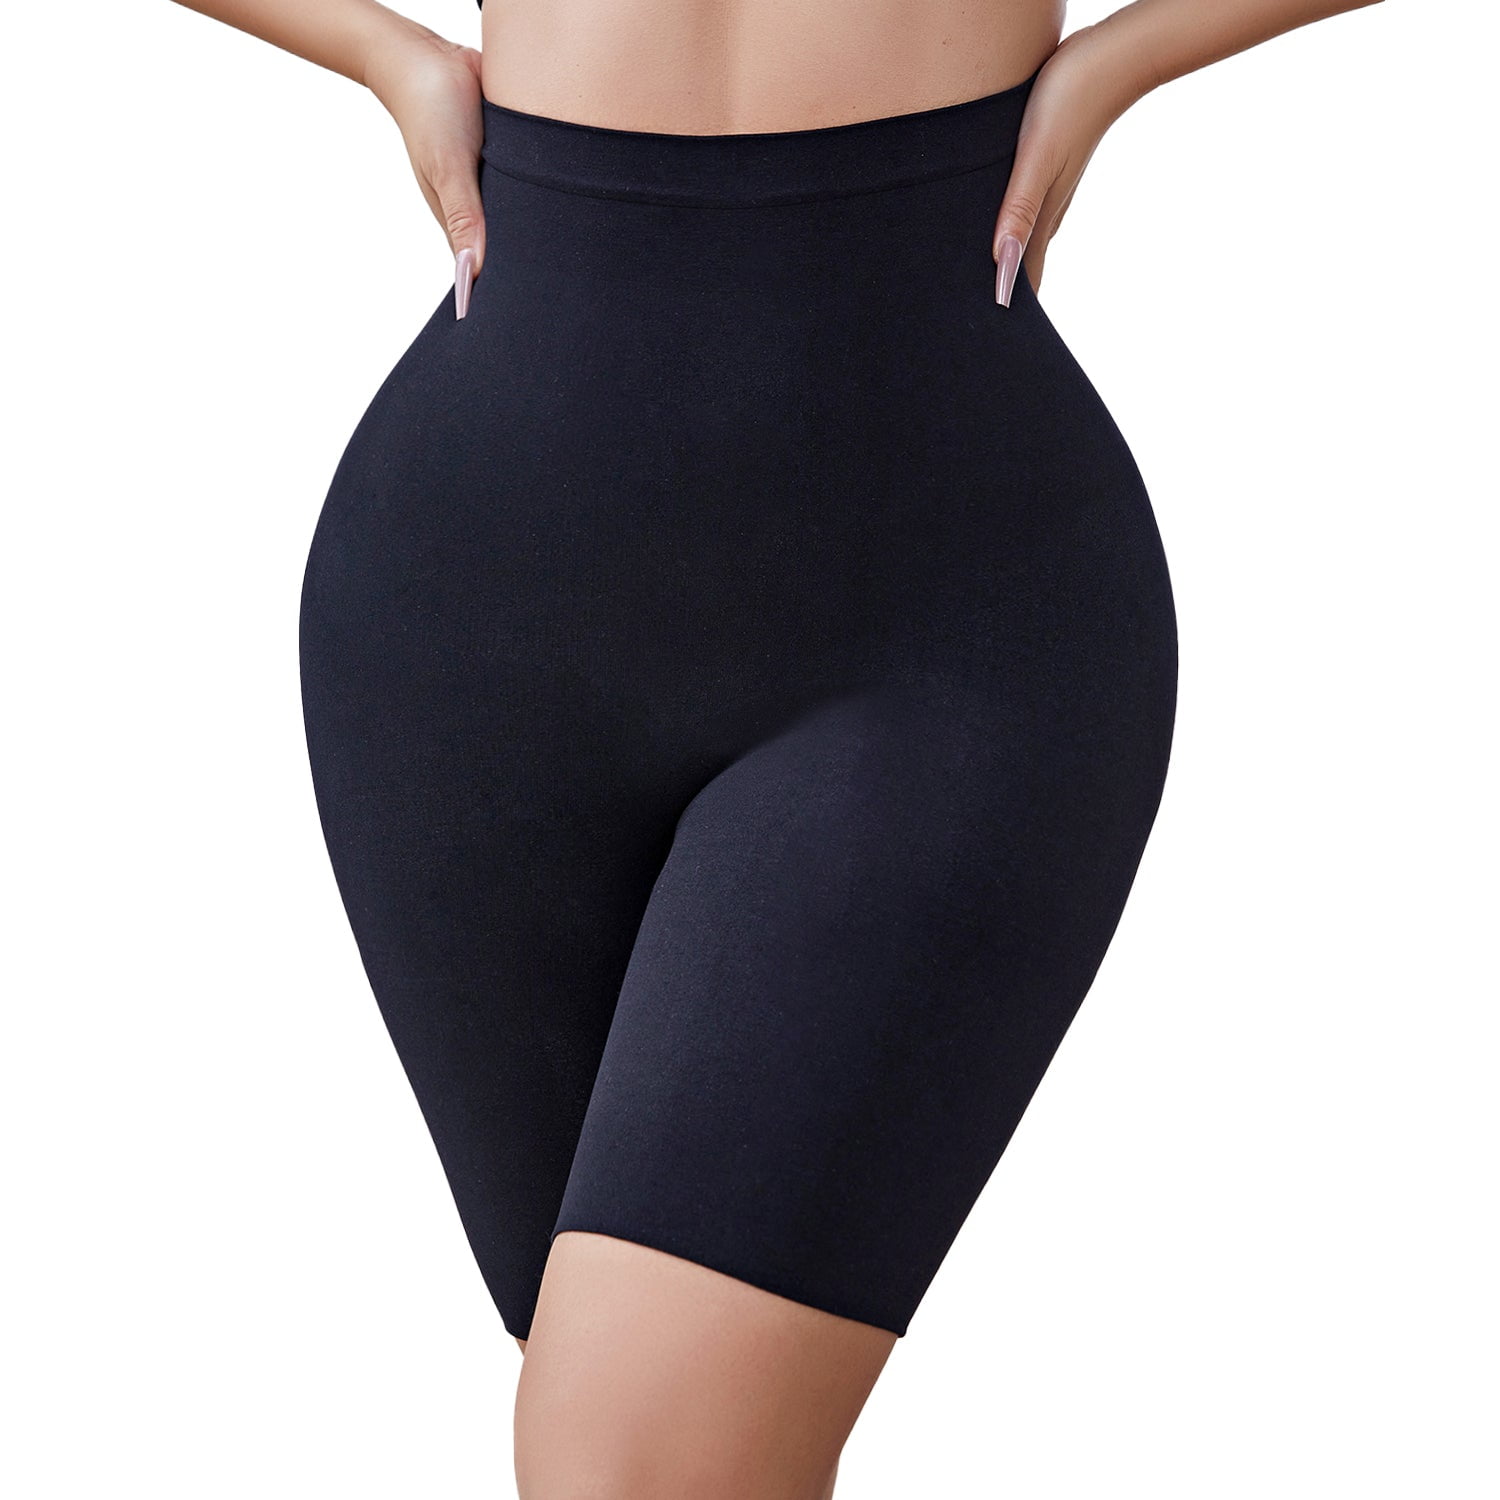 Suprenx Shapewear Leggings for Women Target Firm Control Butt Lifting Thigh Slimmer Pants 